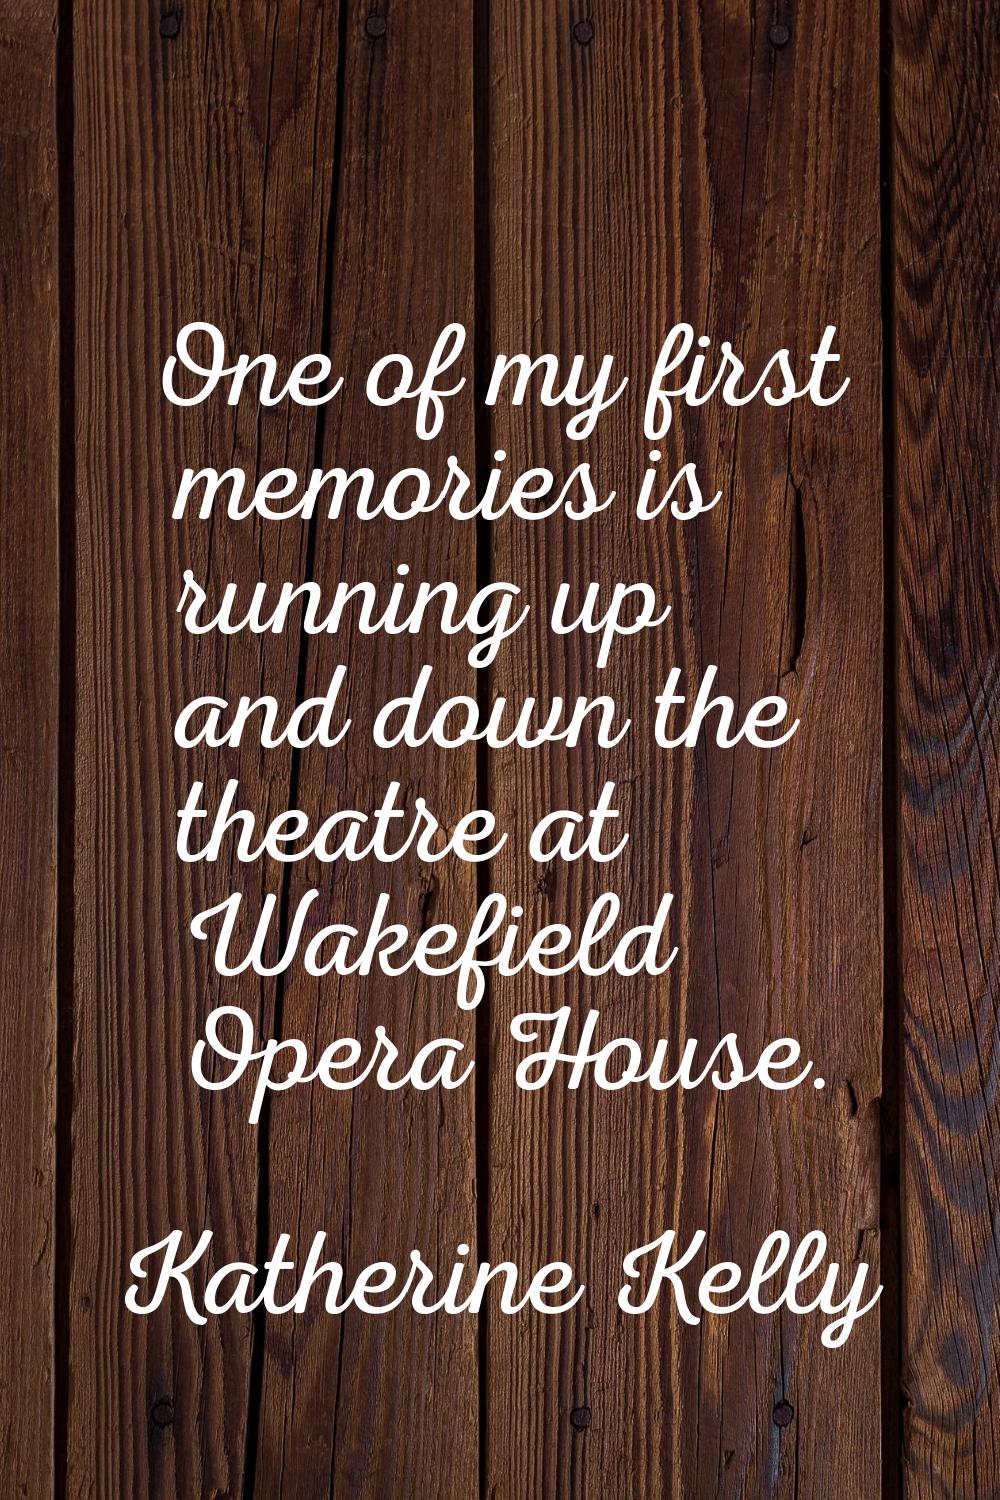 One of my first memories is running up and down the theatre at Wakefield Opera House.